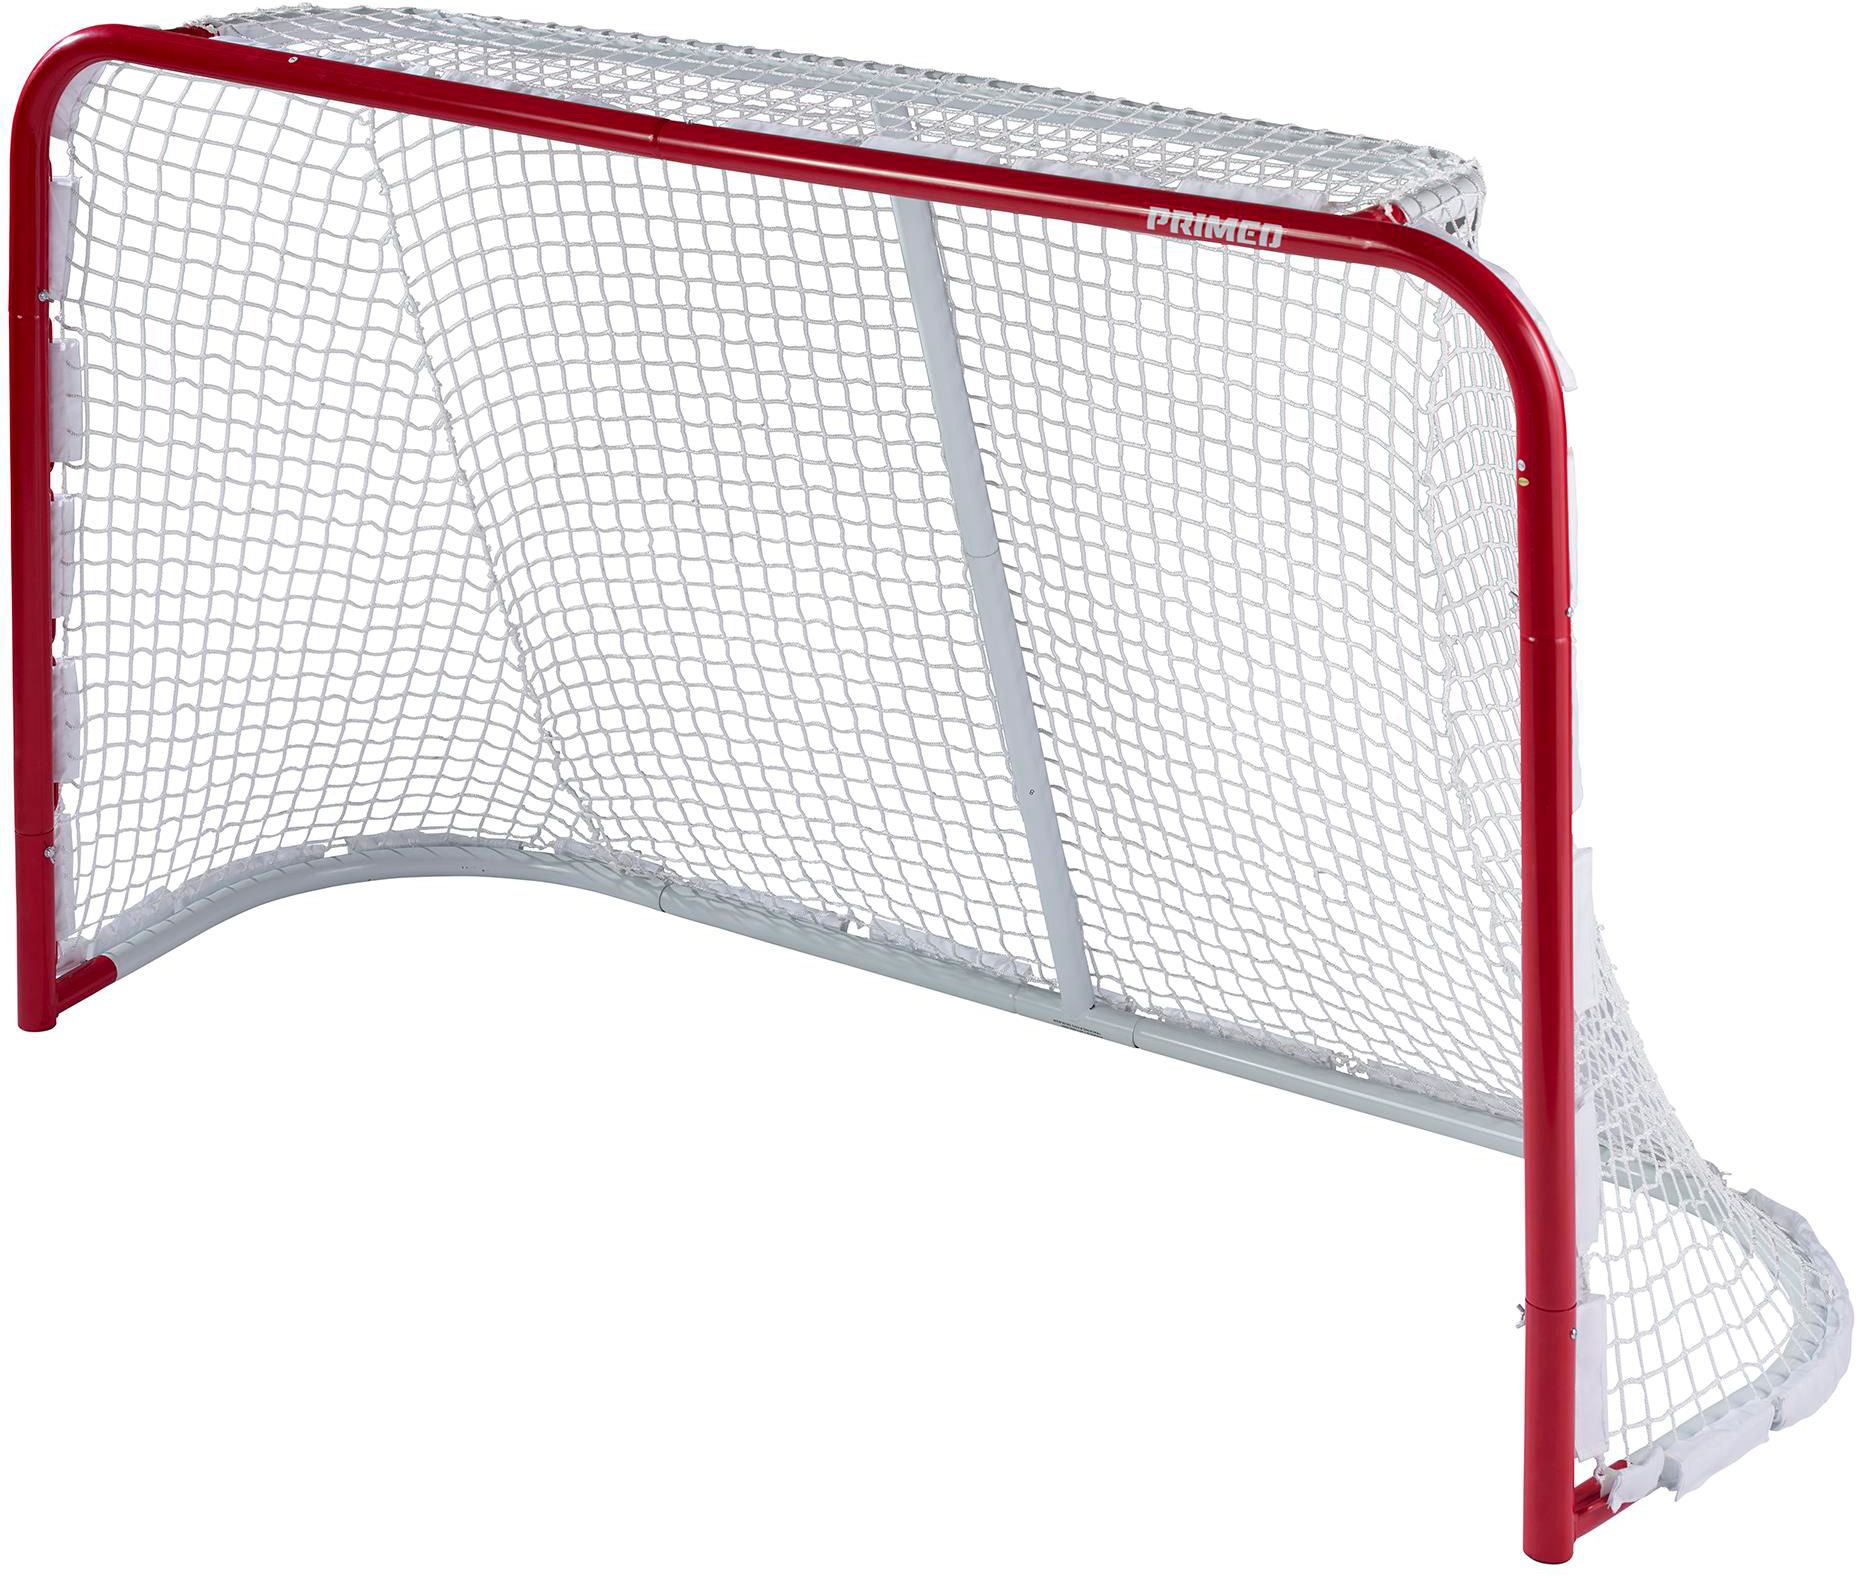 Shop Hockey Equipment & Gear - Best Price at DICK'S